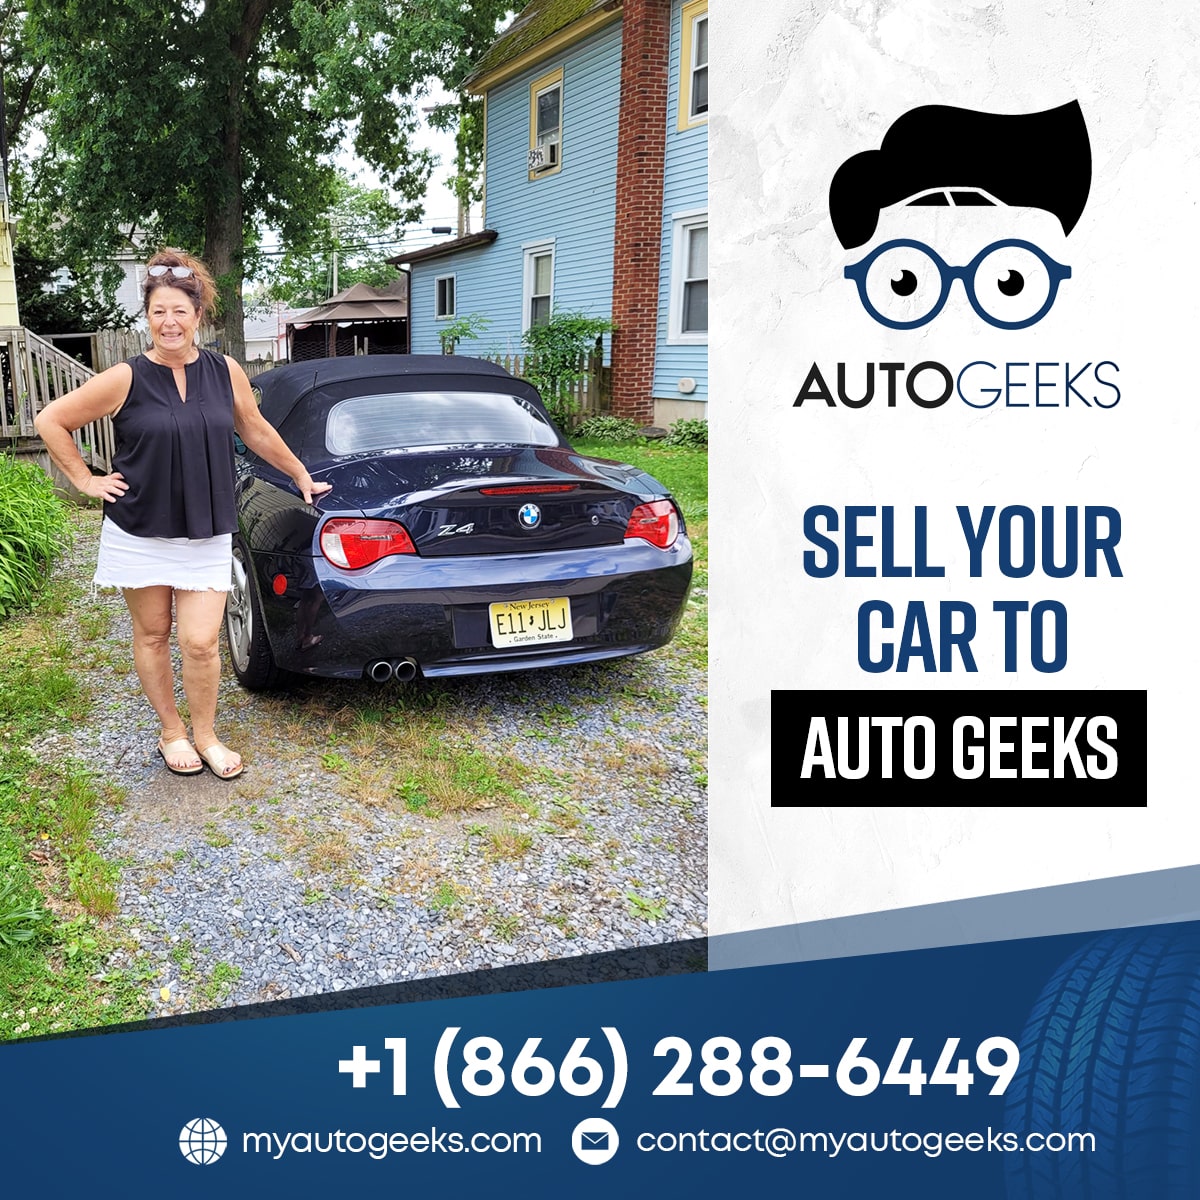 Auto Geeks - Sell Your Car Online